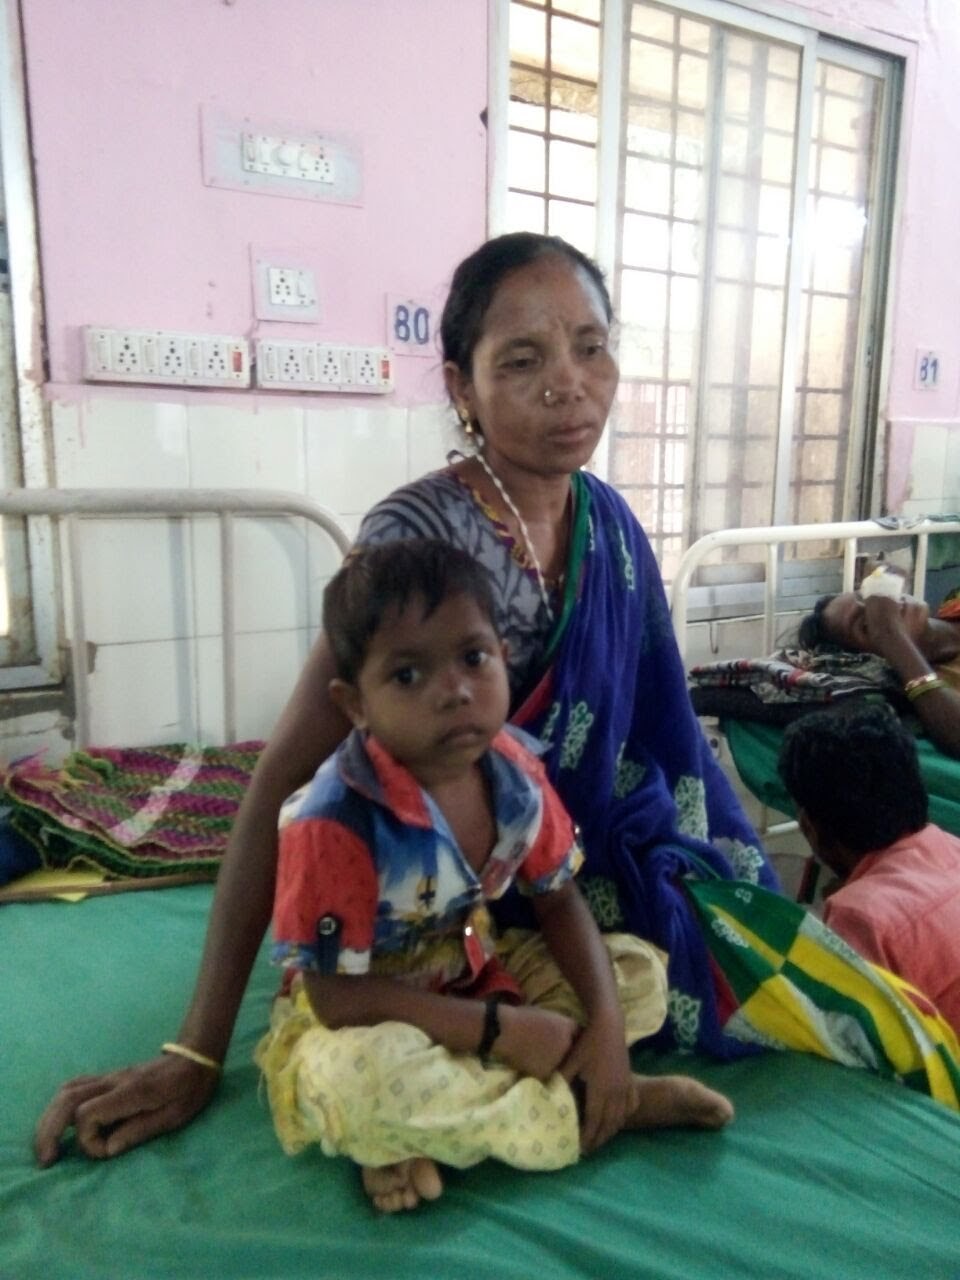 A single mother tending to her seriously ill child born without a rectum